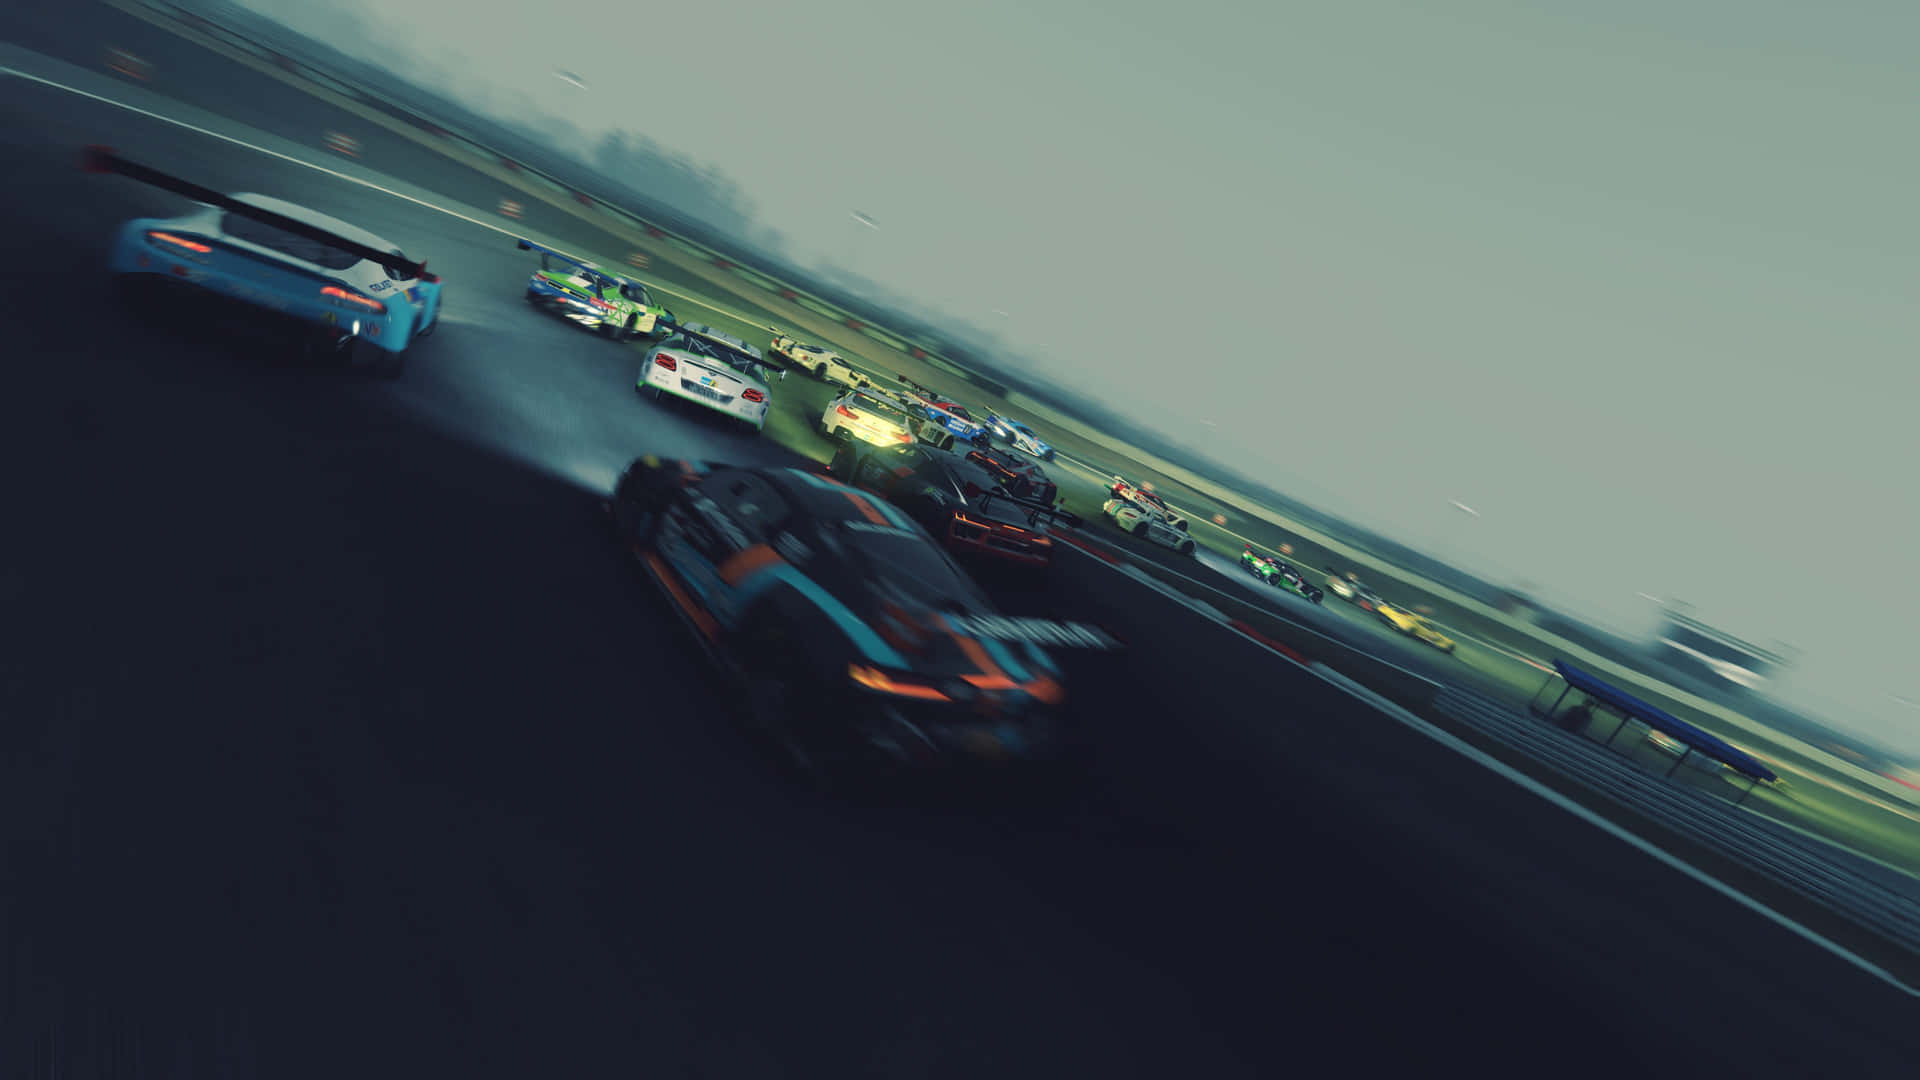 4k Project Cars 2 Background